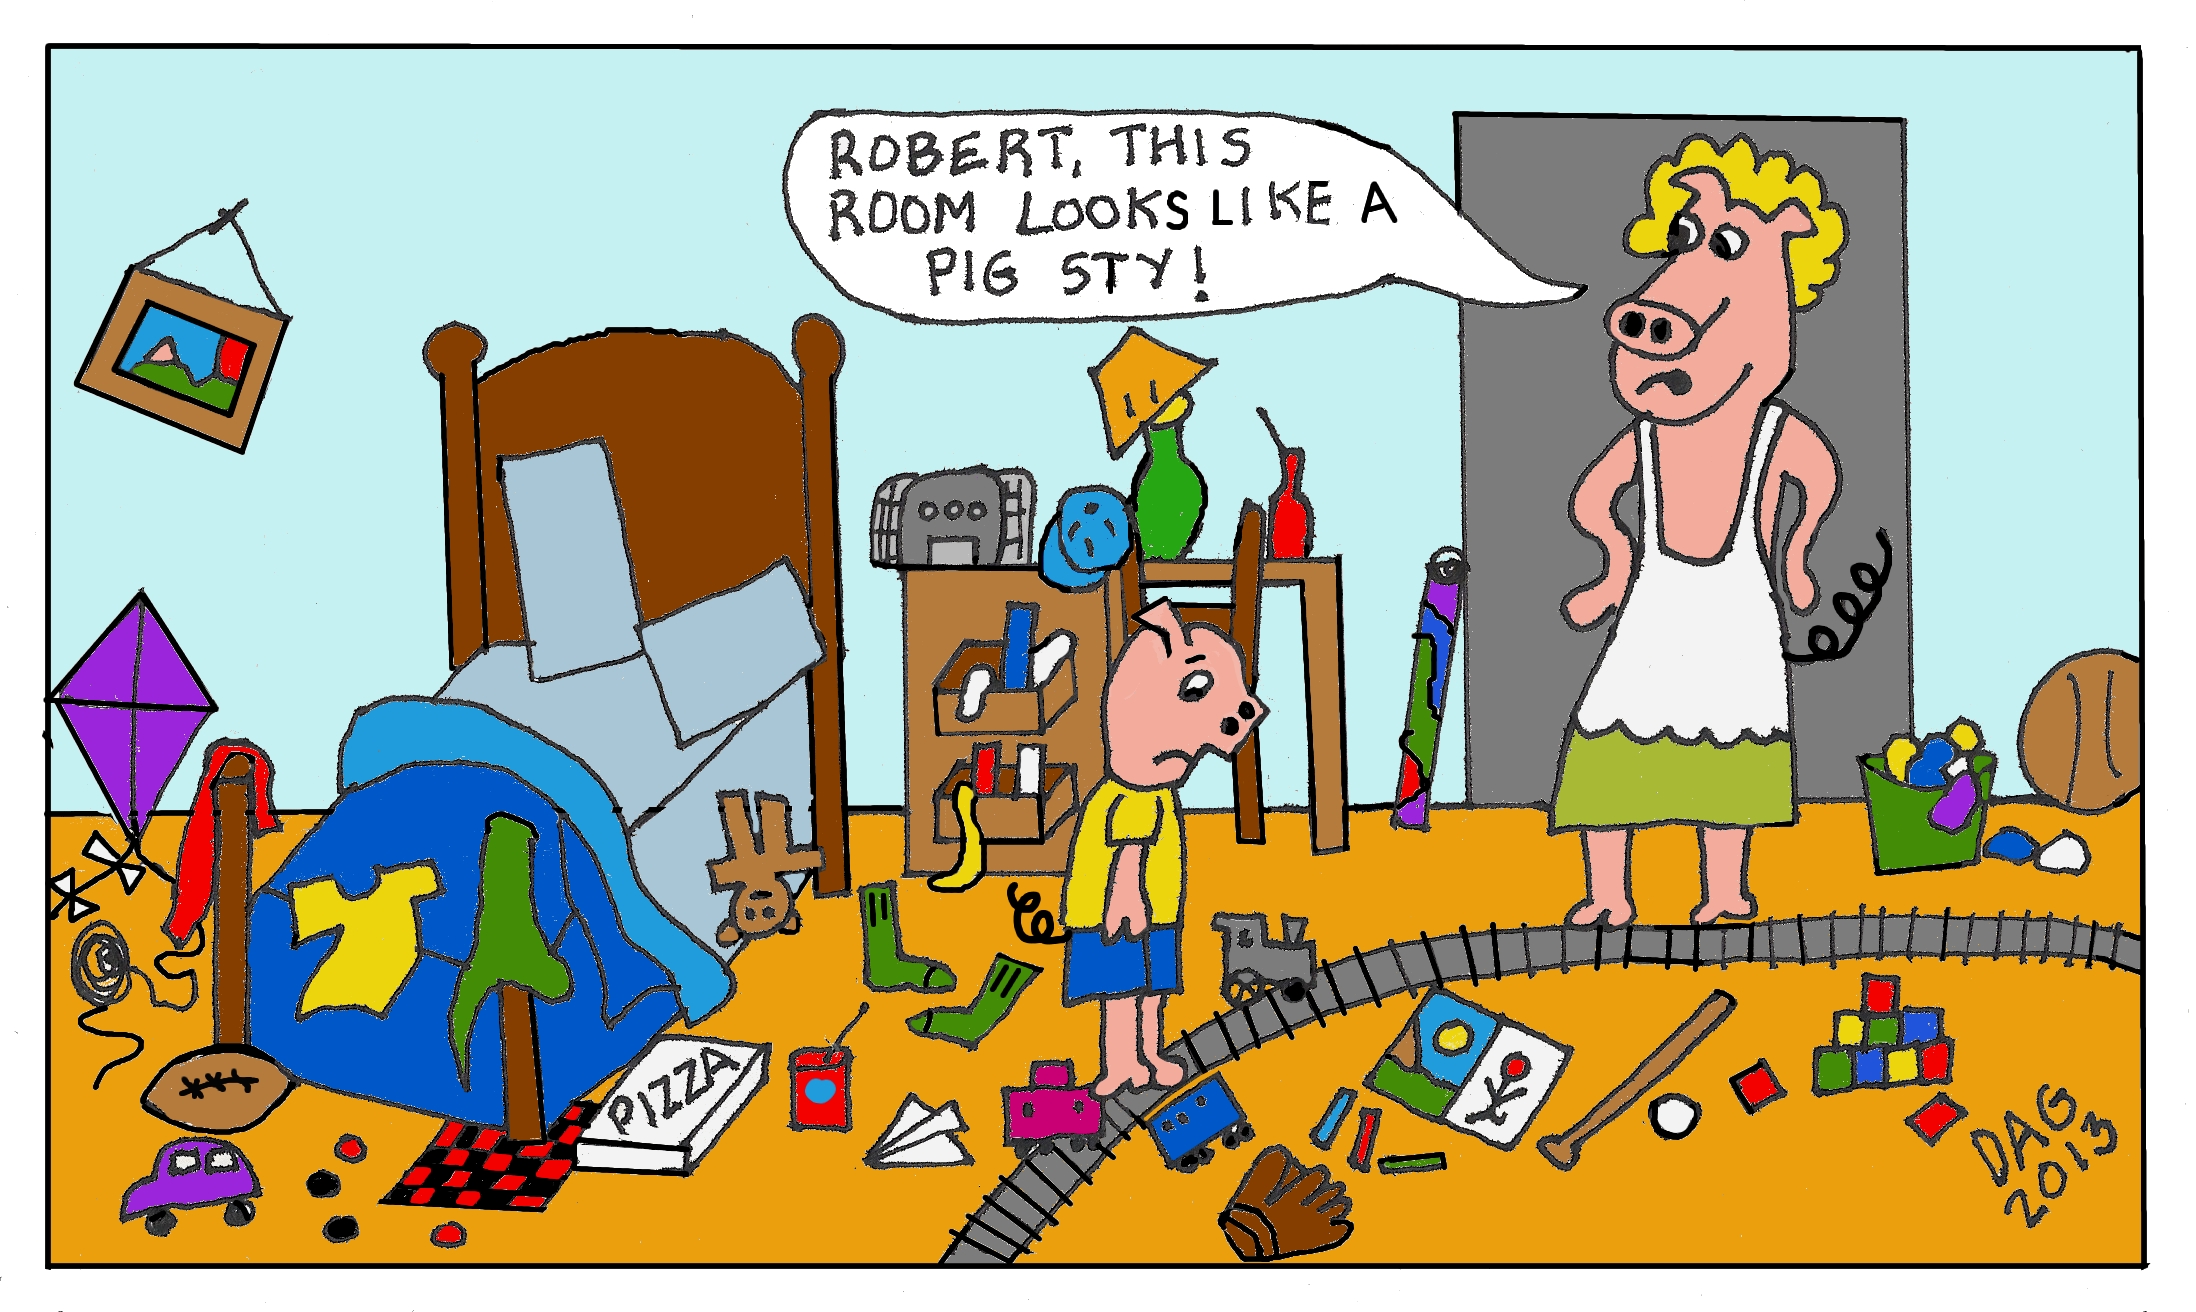 Clean up the mess. Clean up the Room. Tidy Room and messy Room. Tidy Room cartoon. Clean your Room.